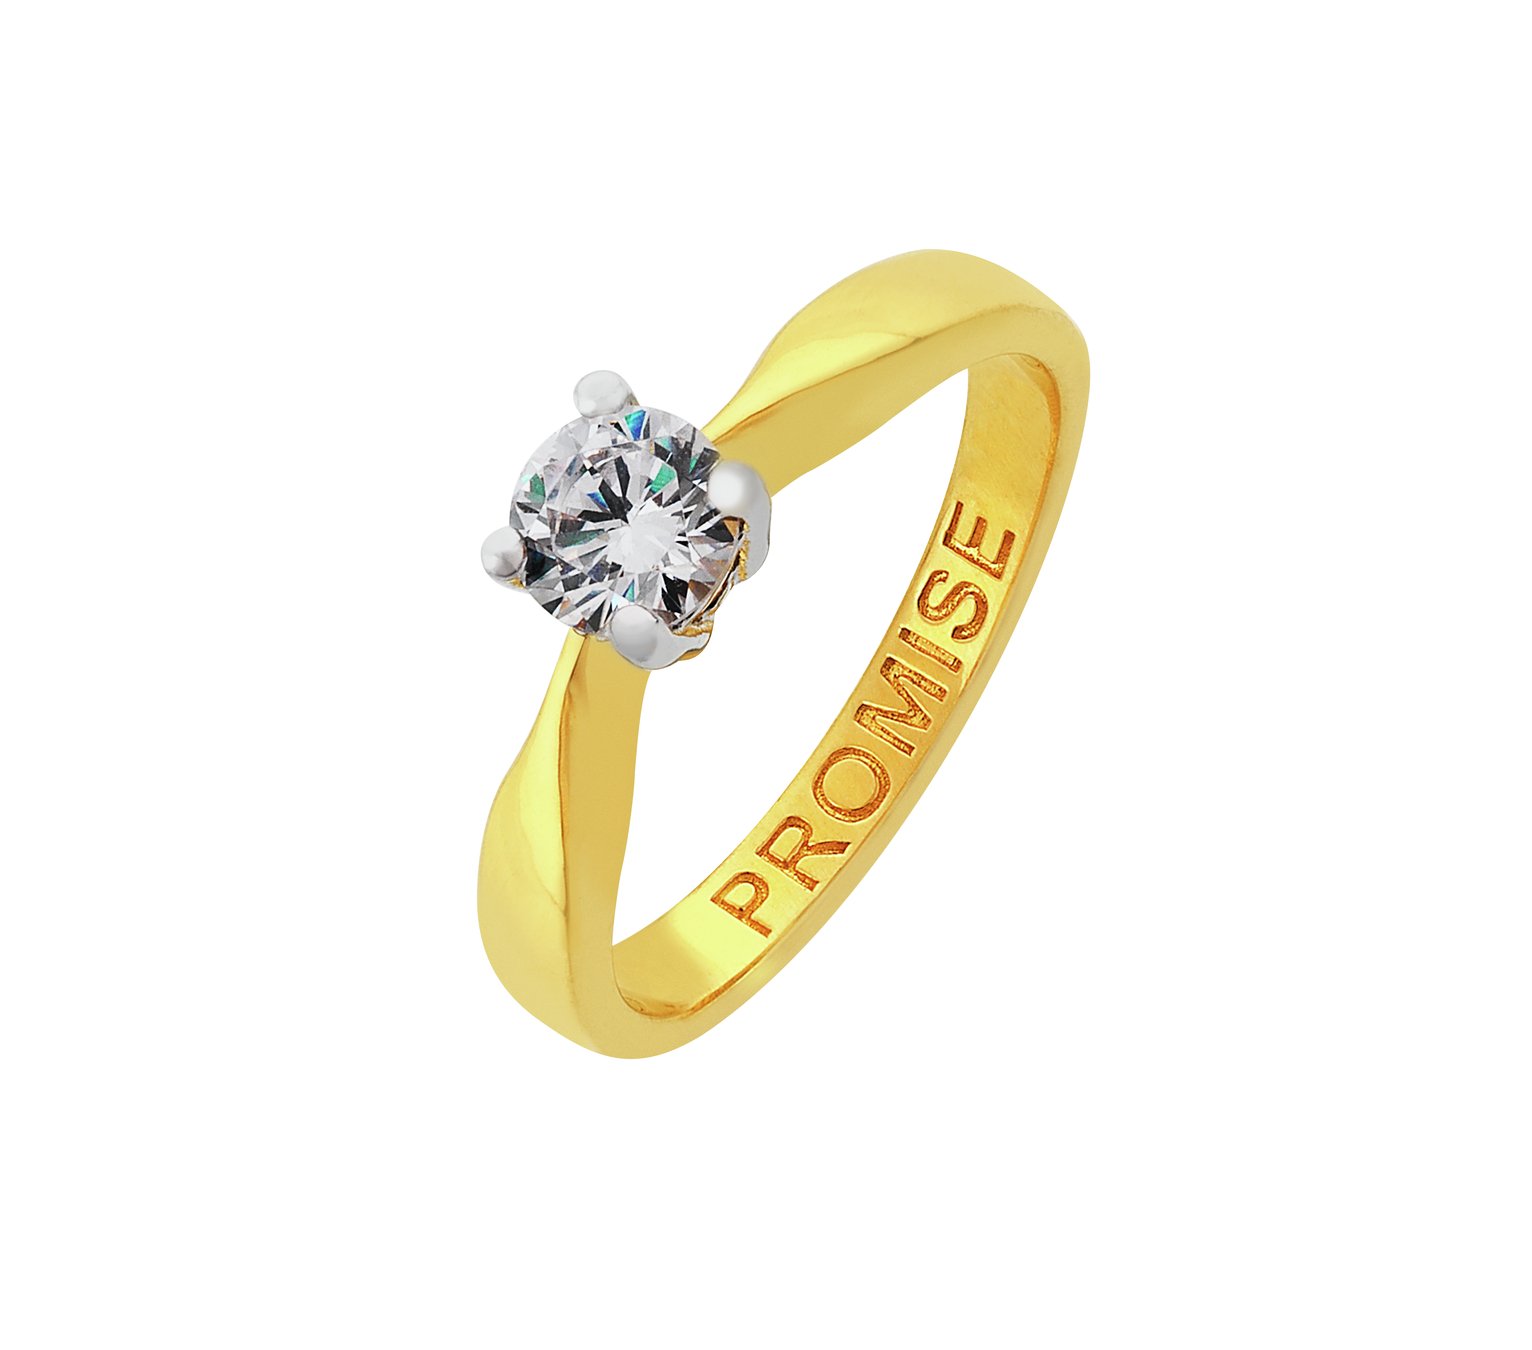 Revere 9ct Gold Plated Silver Cubic Zirconia 'Promise' Ring